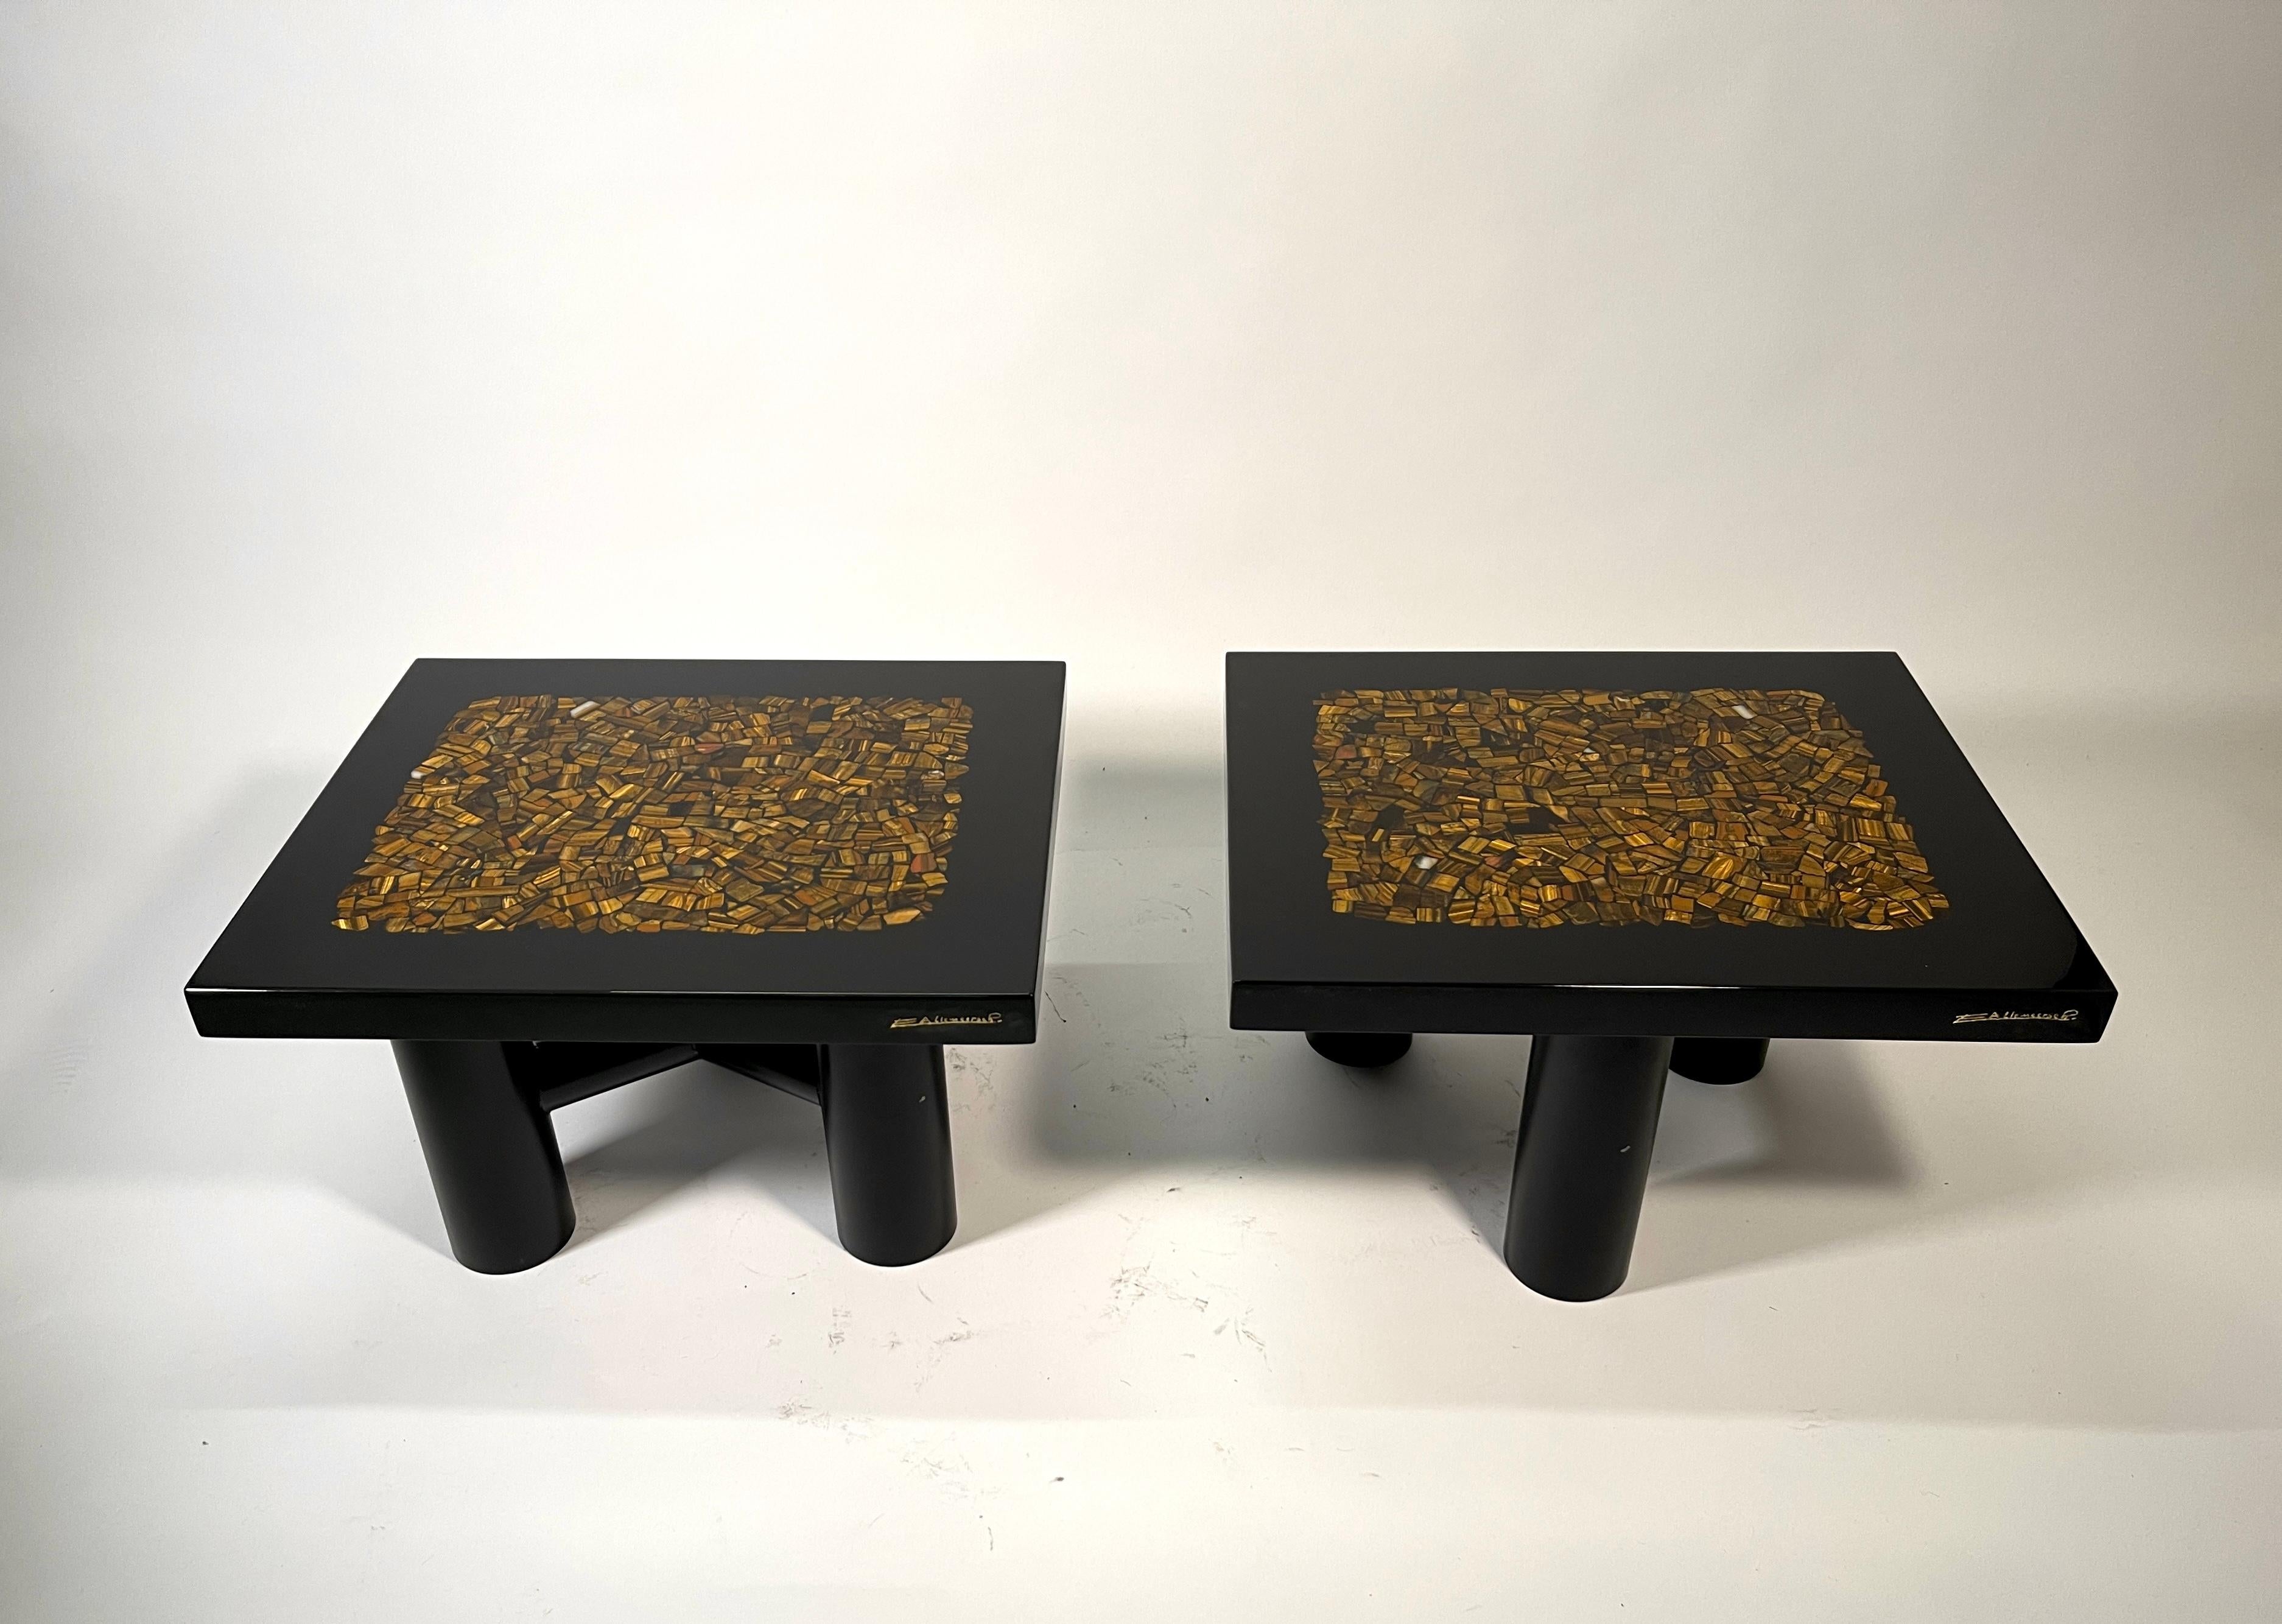 Pair of side table by E. Allemeersch black resin inlay tiger eyes, mosaic in tiger eyes, signed by the artist, circa 1980. base in black metal.